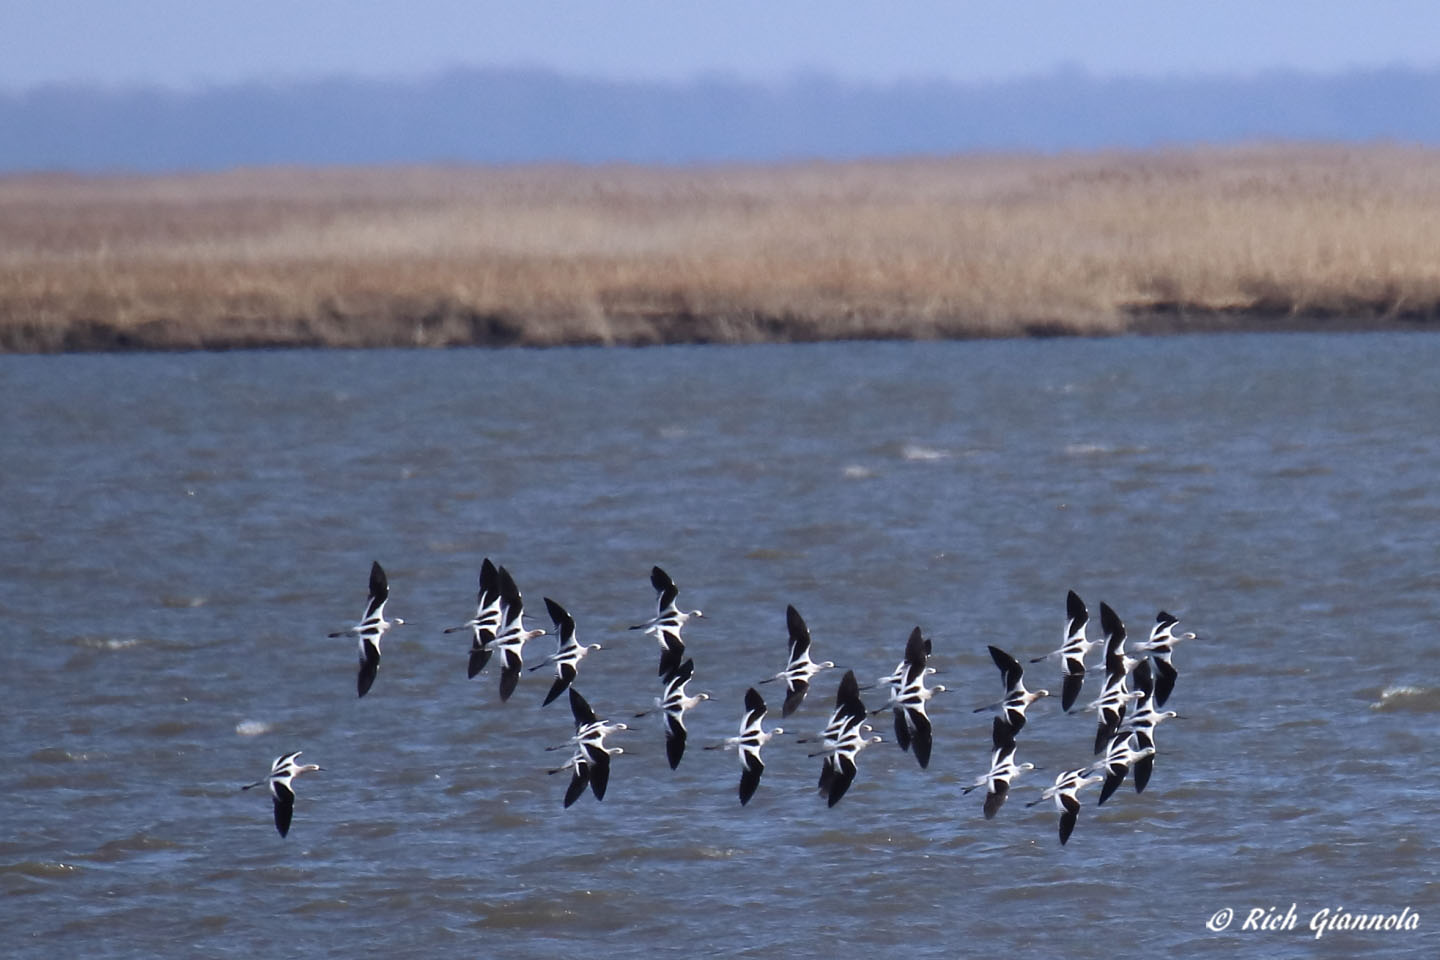 Birding at Bombay Hook NWR: Featuring American Avocets (3/10/21)